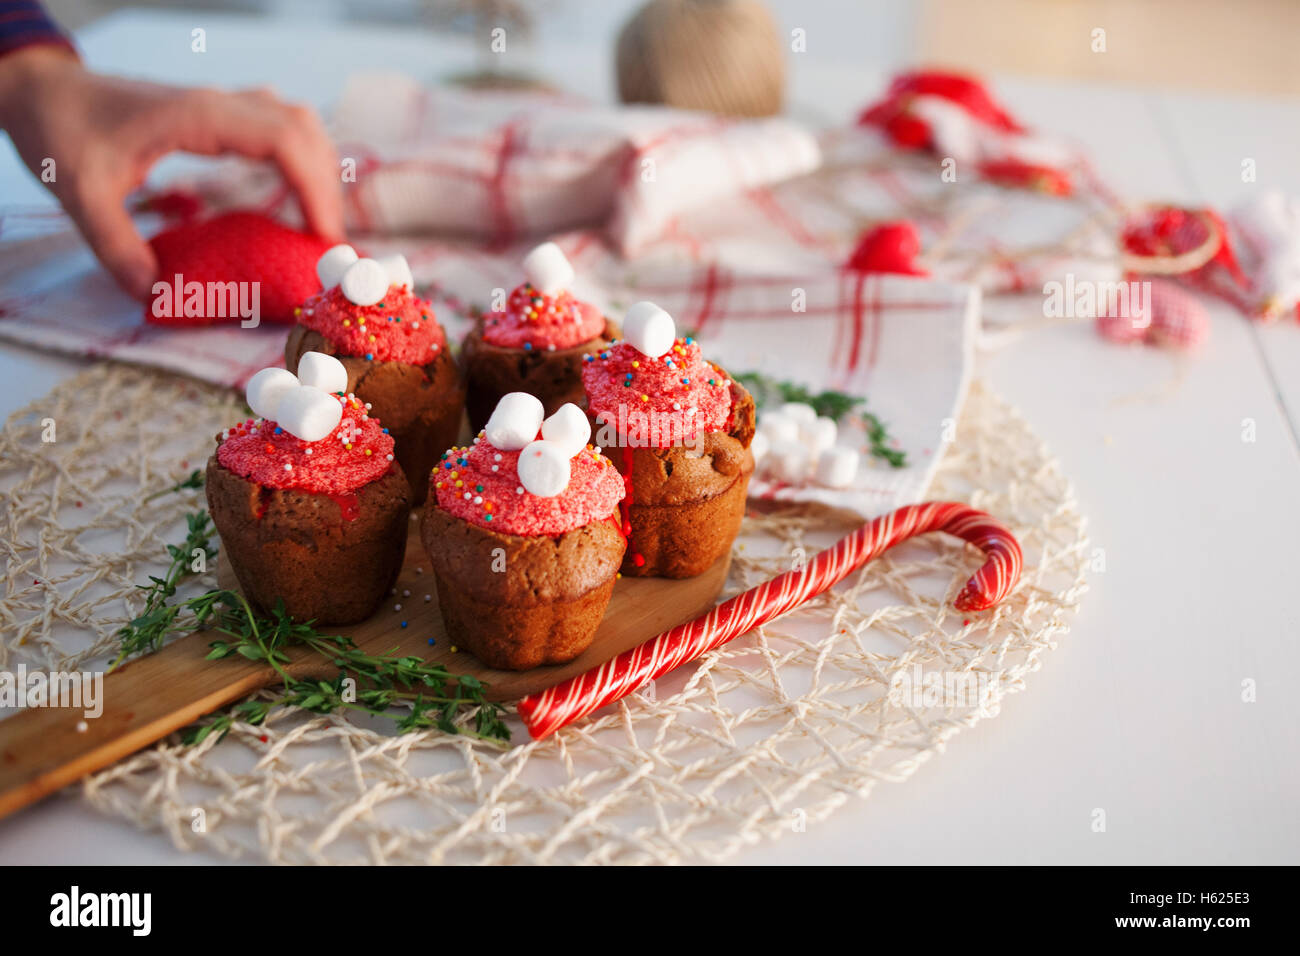 New Year celebration cupcakes, chocolate muffins on table Stock Photo